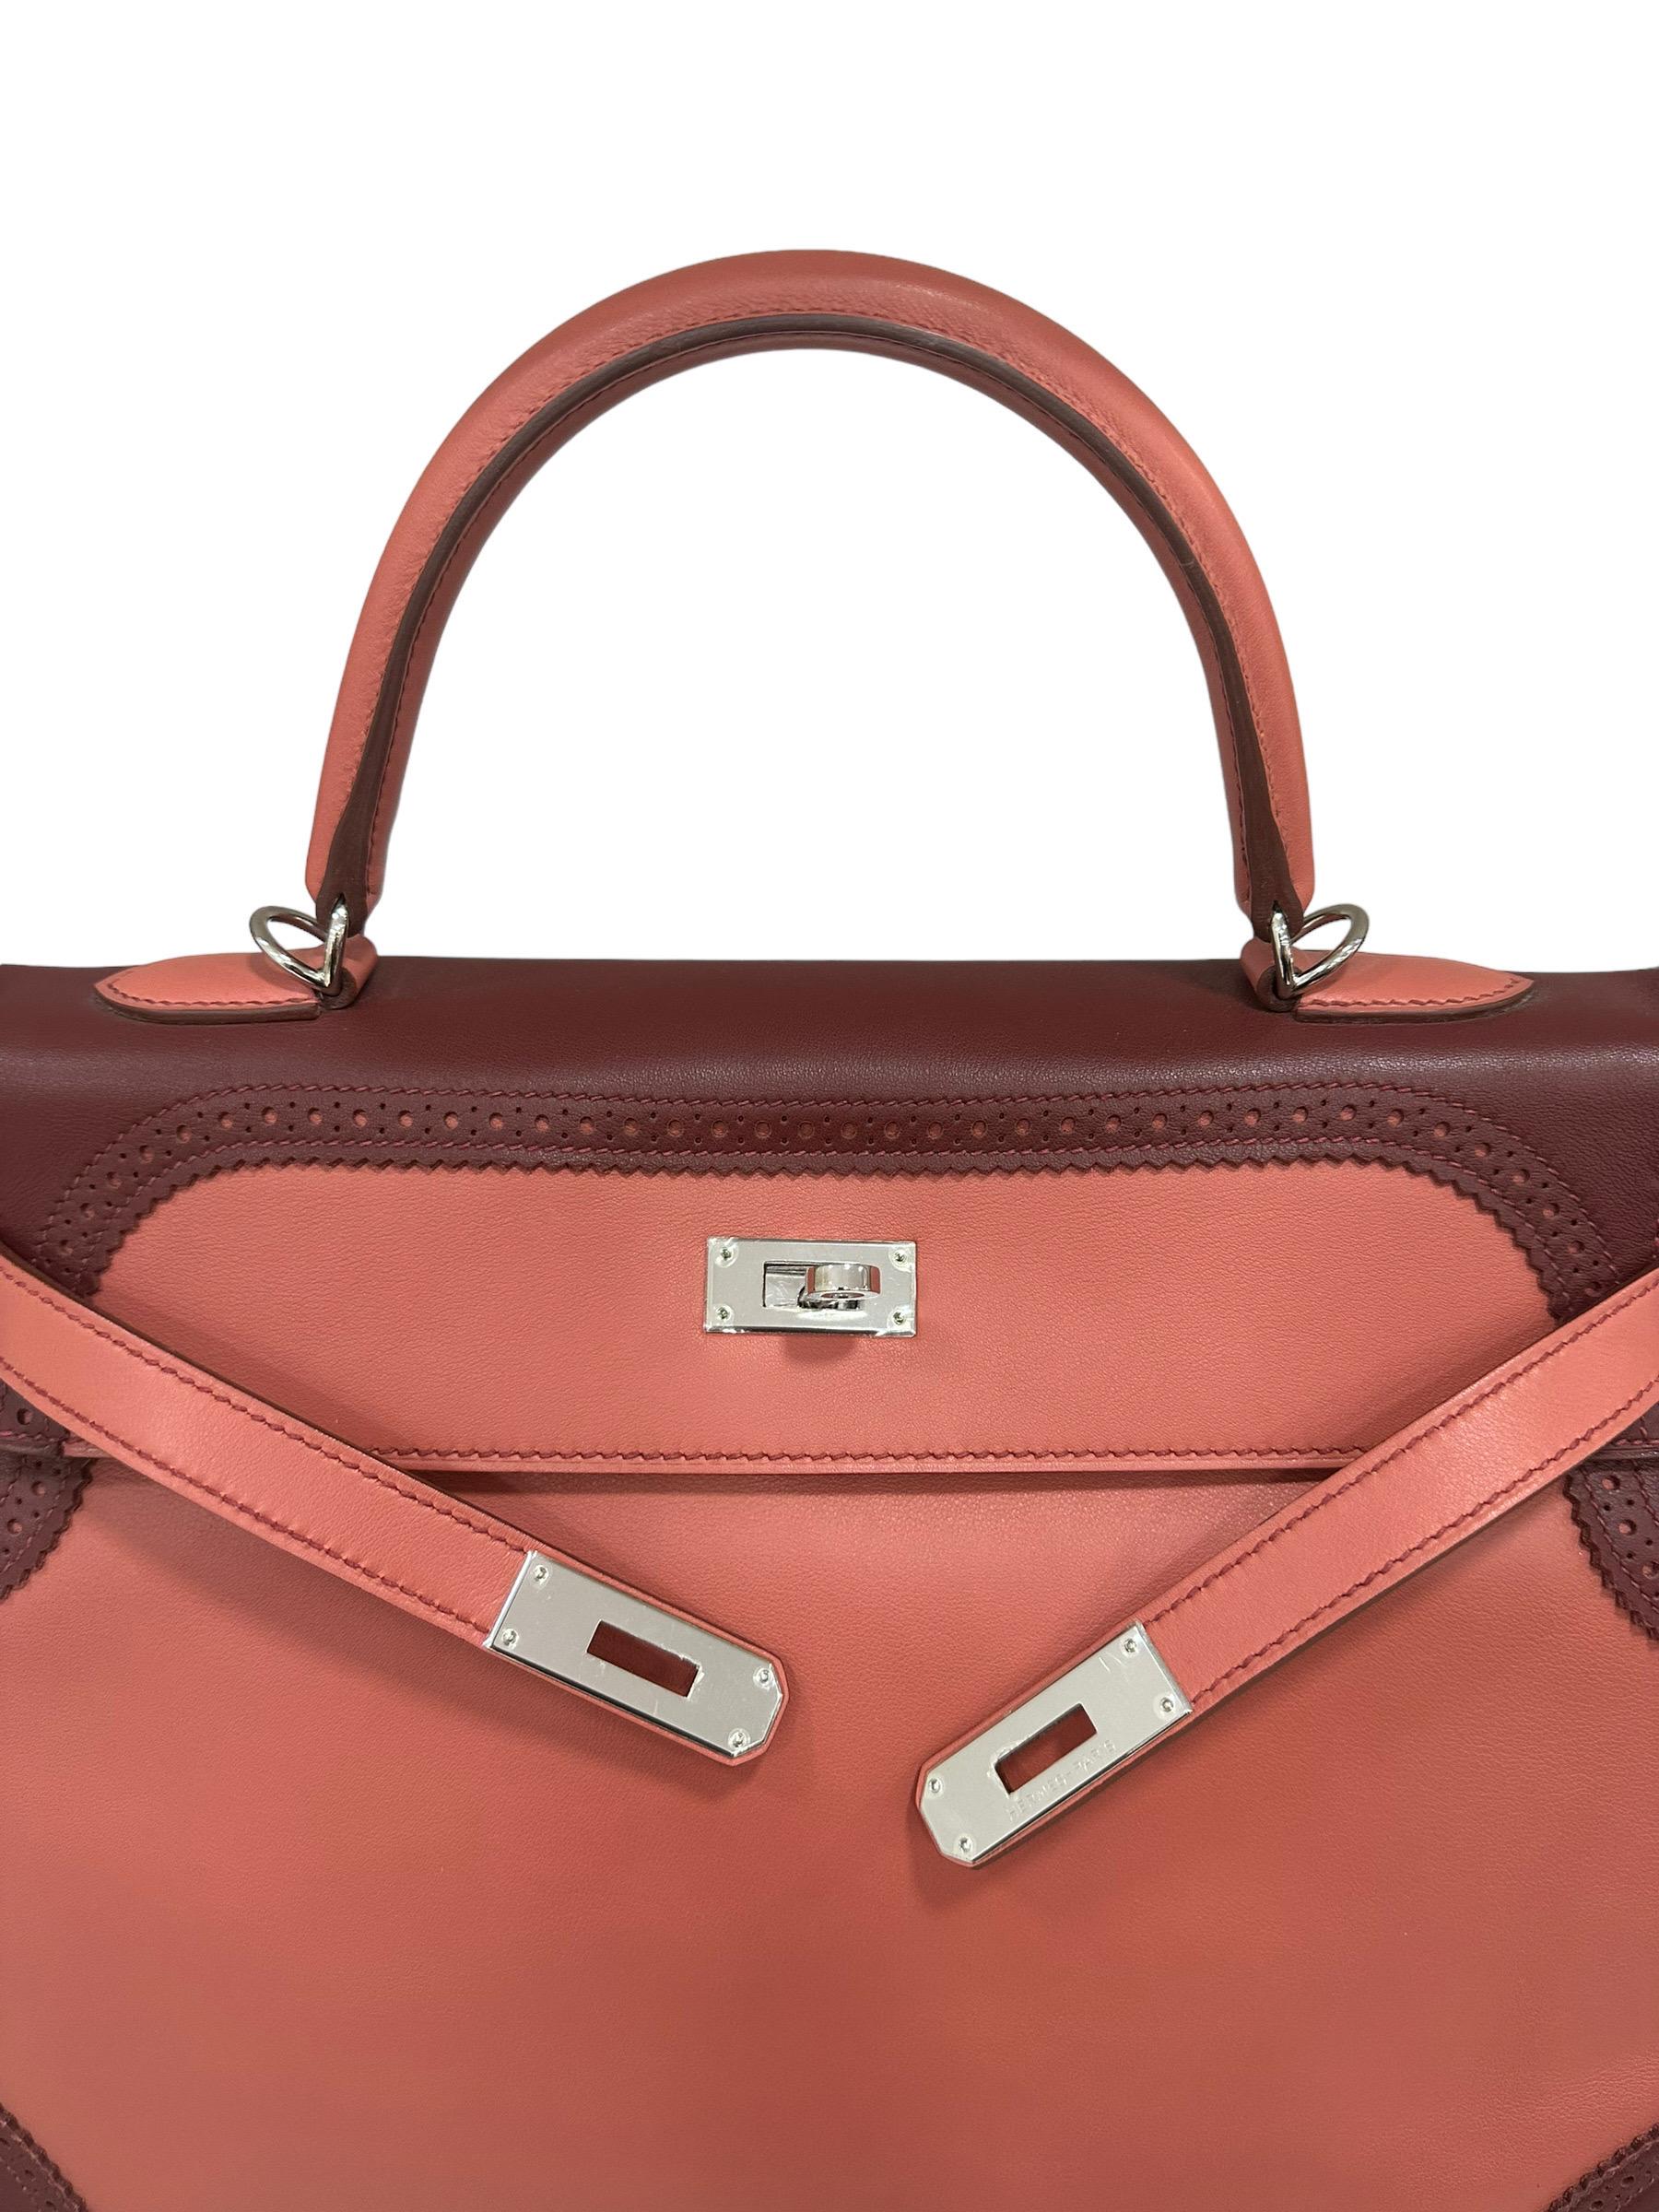 2012 Hermès Kelly 35 Ghillies Evercalf Rose Texas/Rouge H For Sale 7